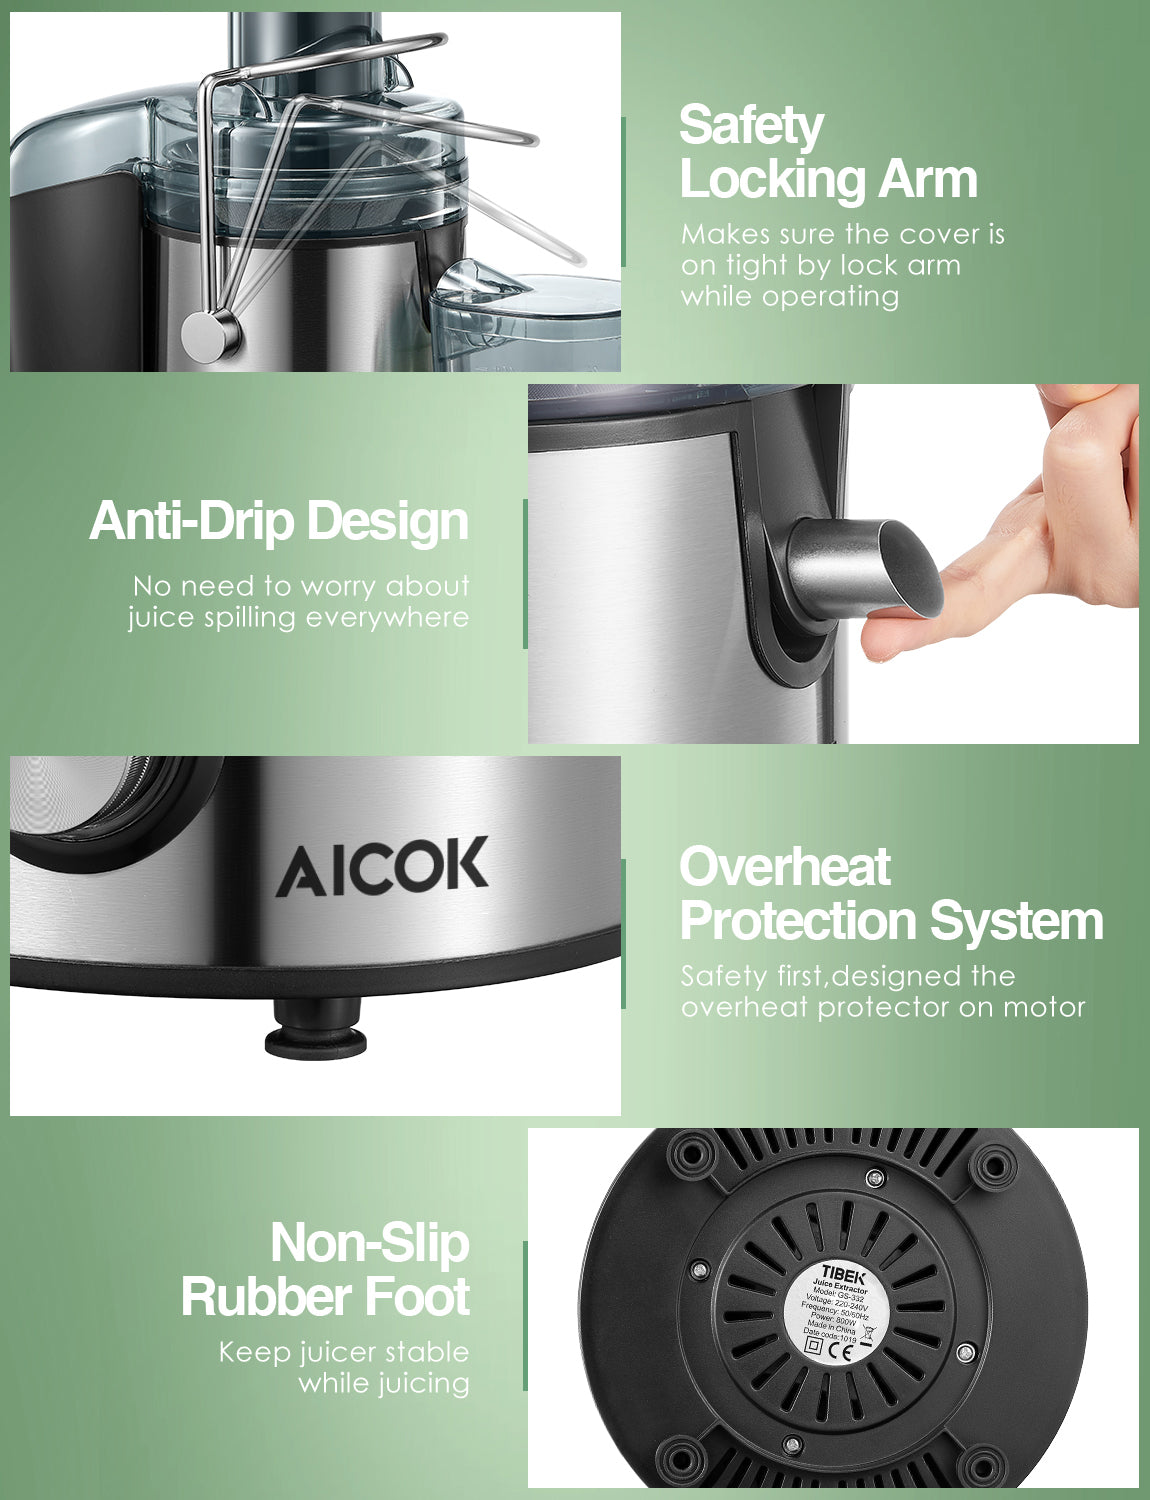 AICOK-Juicer, 1000W Stainless Steel Juicer Machines GS-332, safety locking arm, overheat protection. robber foot